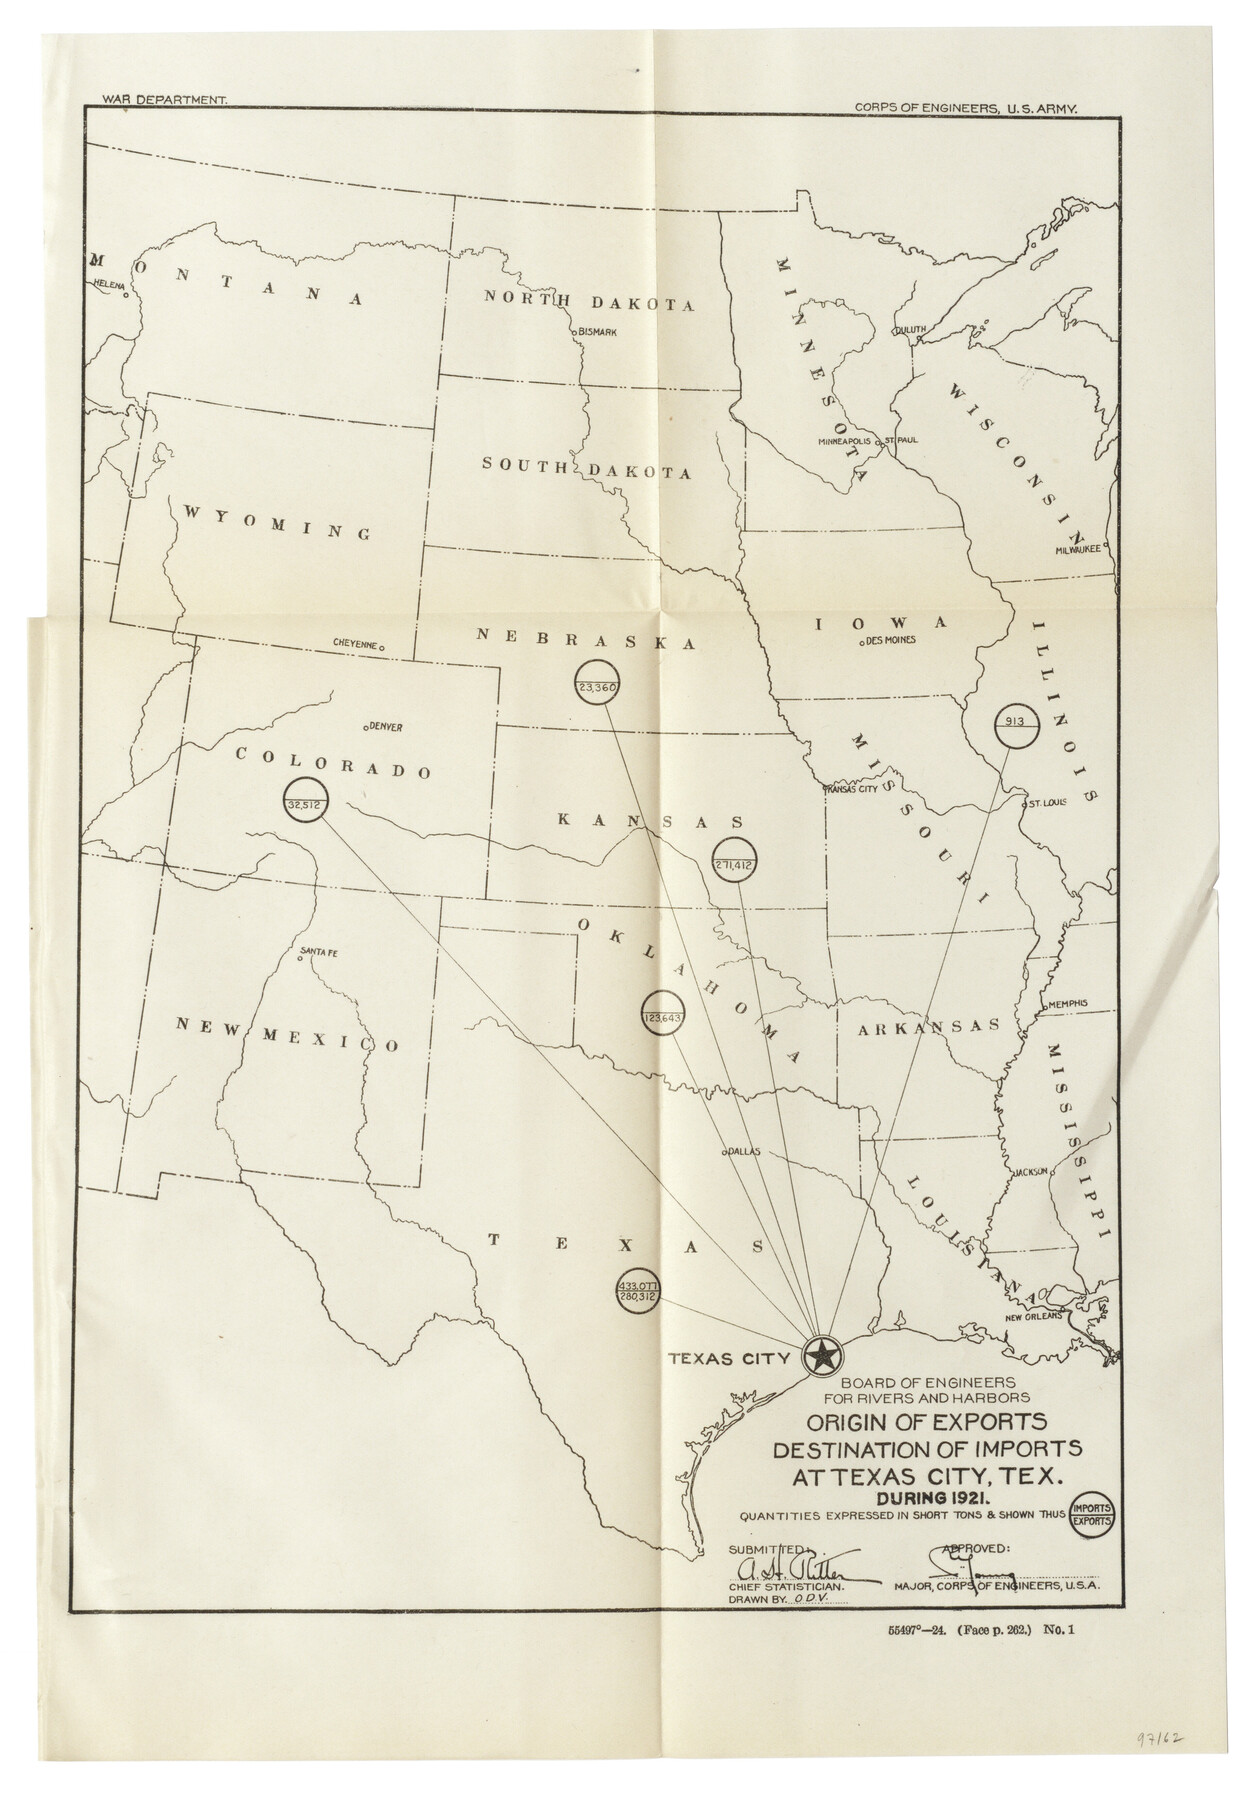 97162, Origin of Exports, Destination of Imports at Texas City, Tex. during 1921, General Map Collection